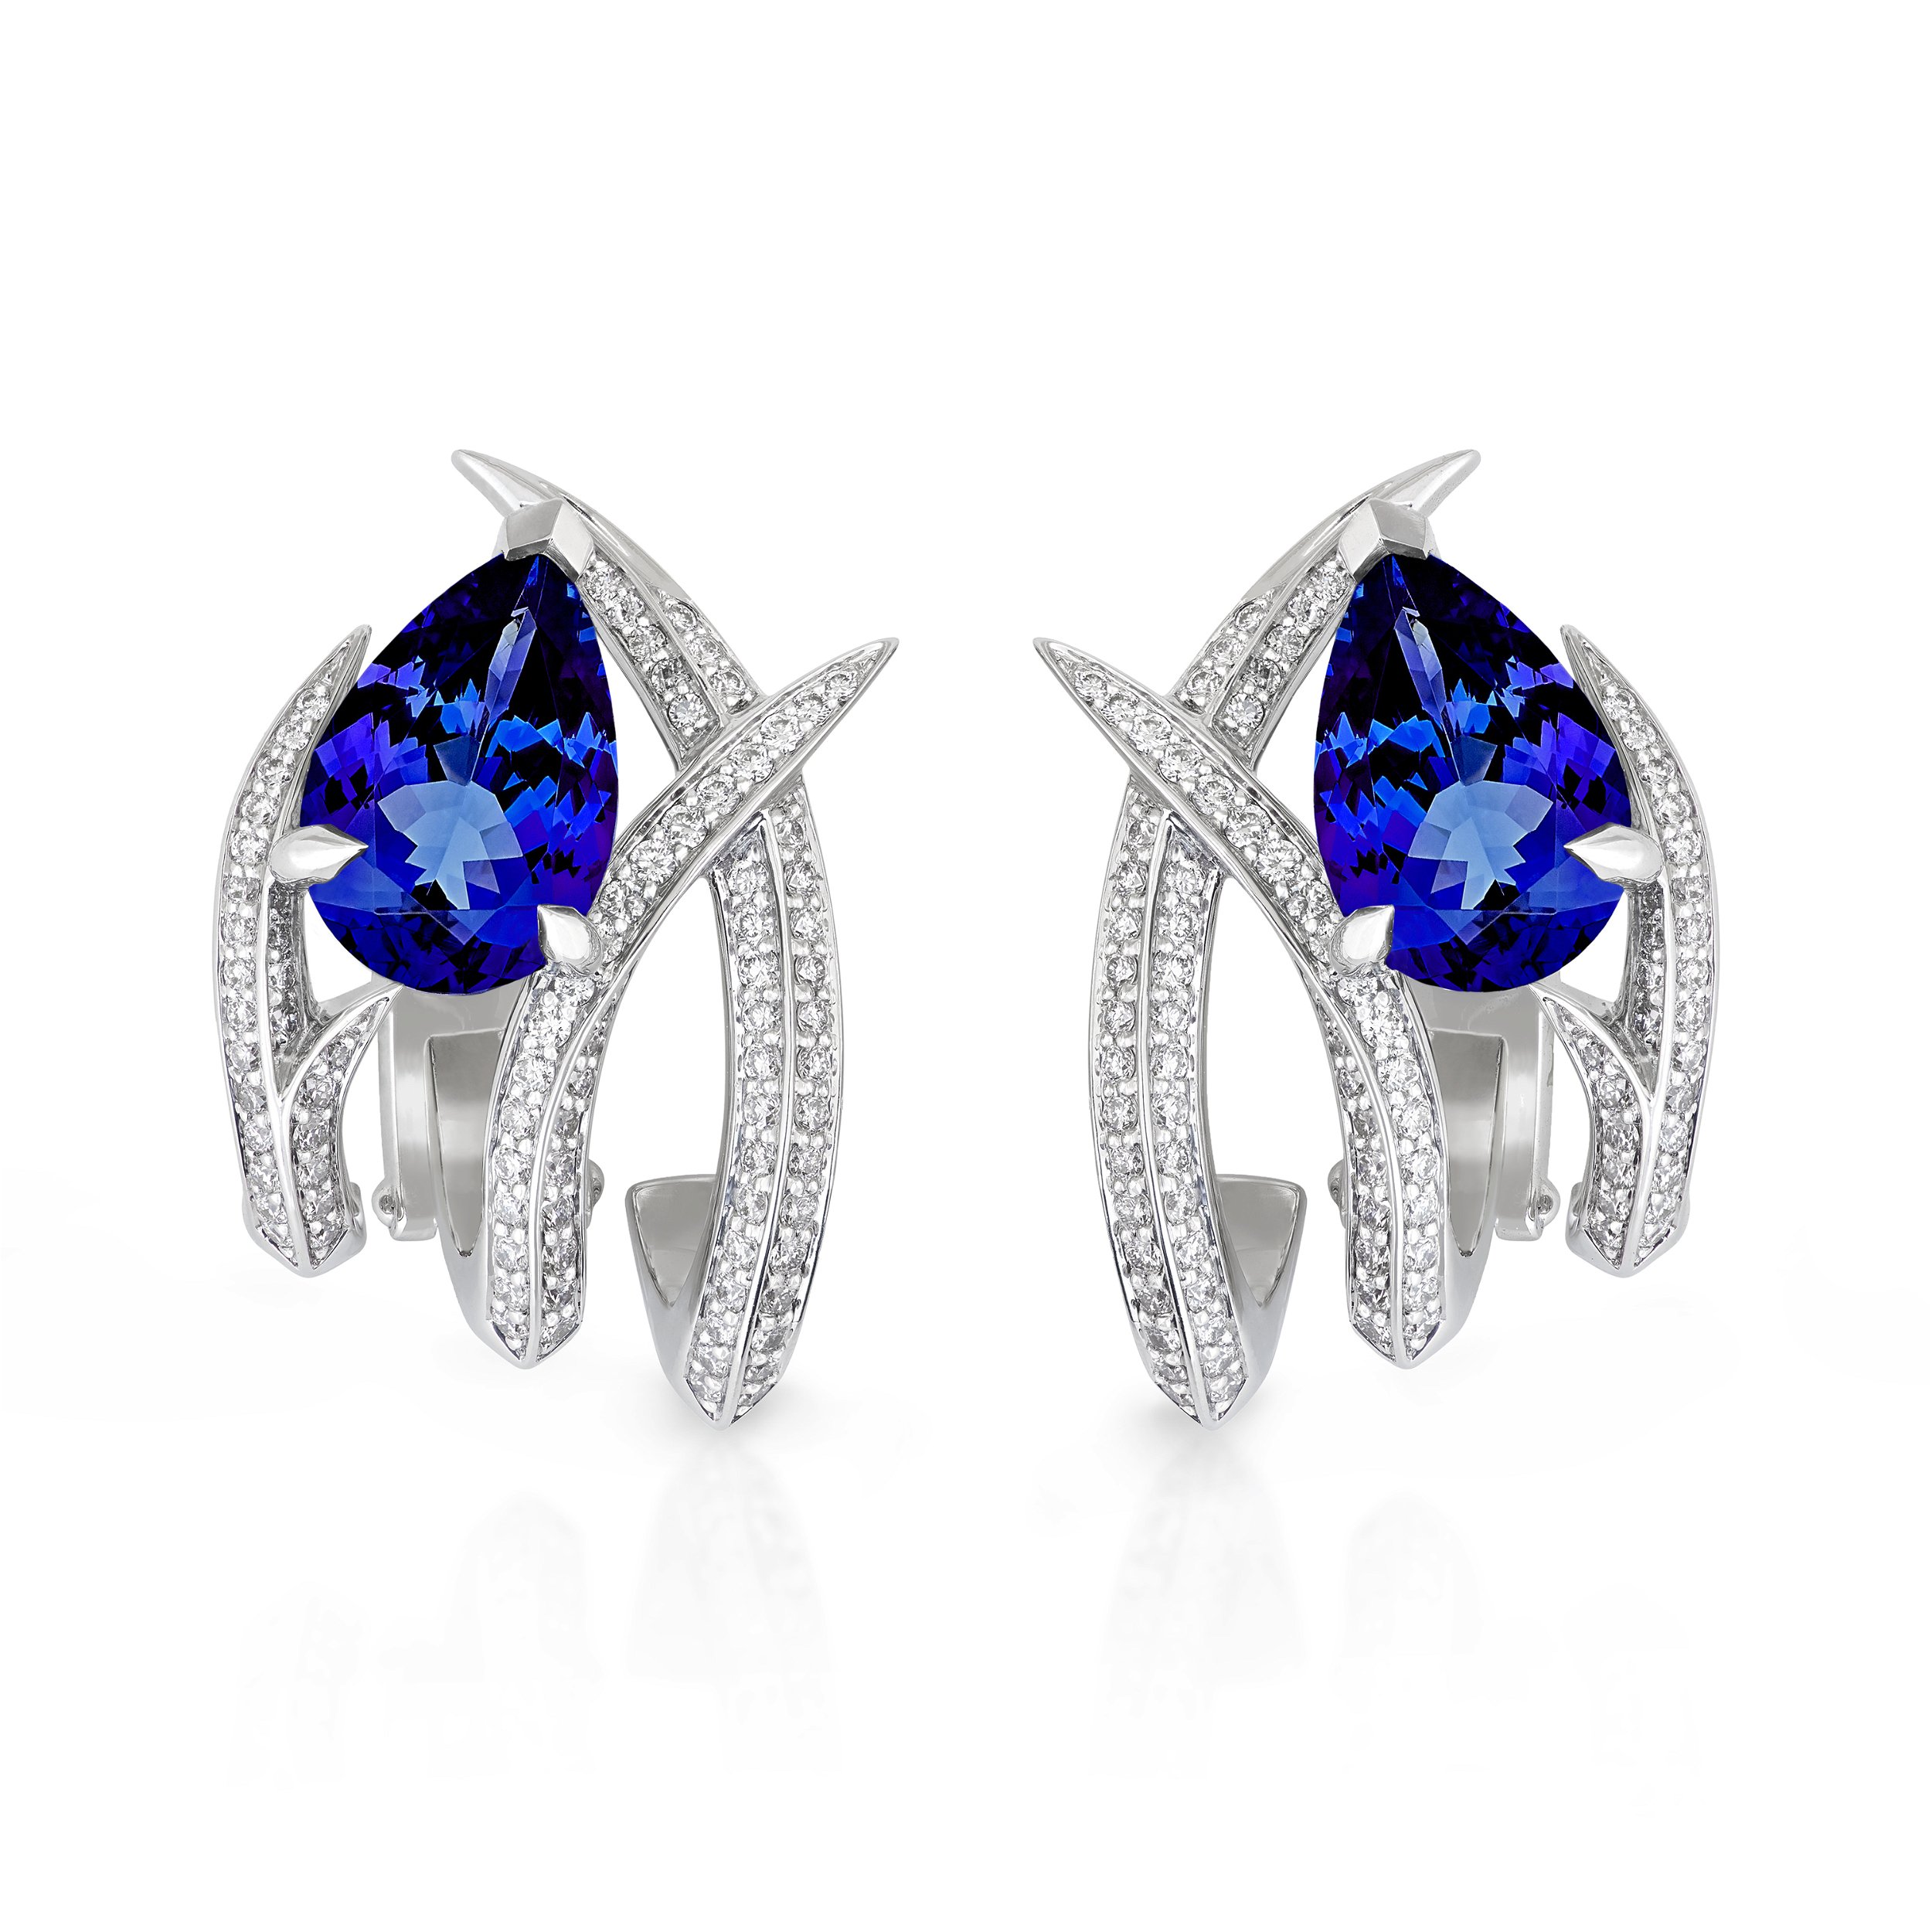 Thorn Embrace Caged Earrings with Tanzanite and White Diamonds in 18kt White Gold